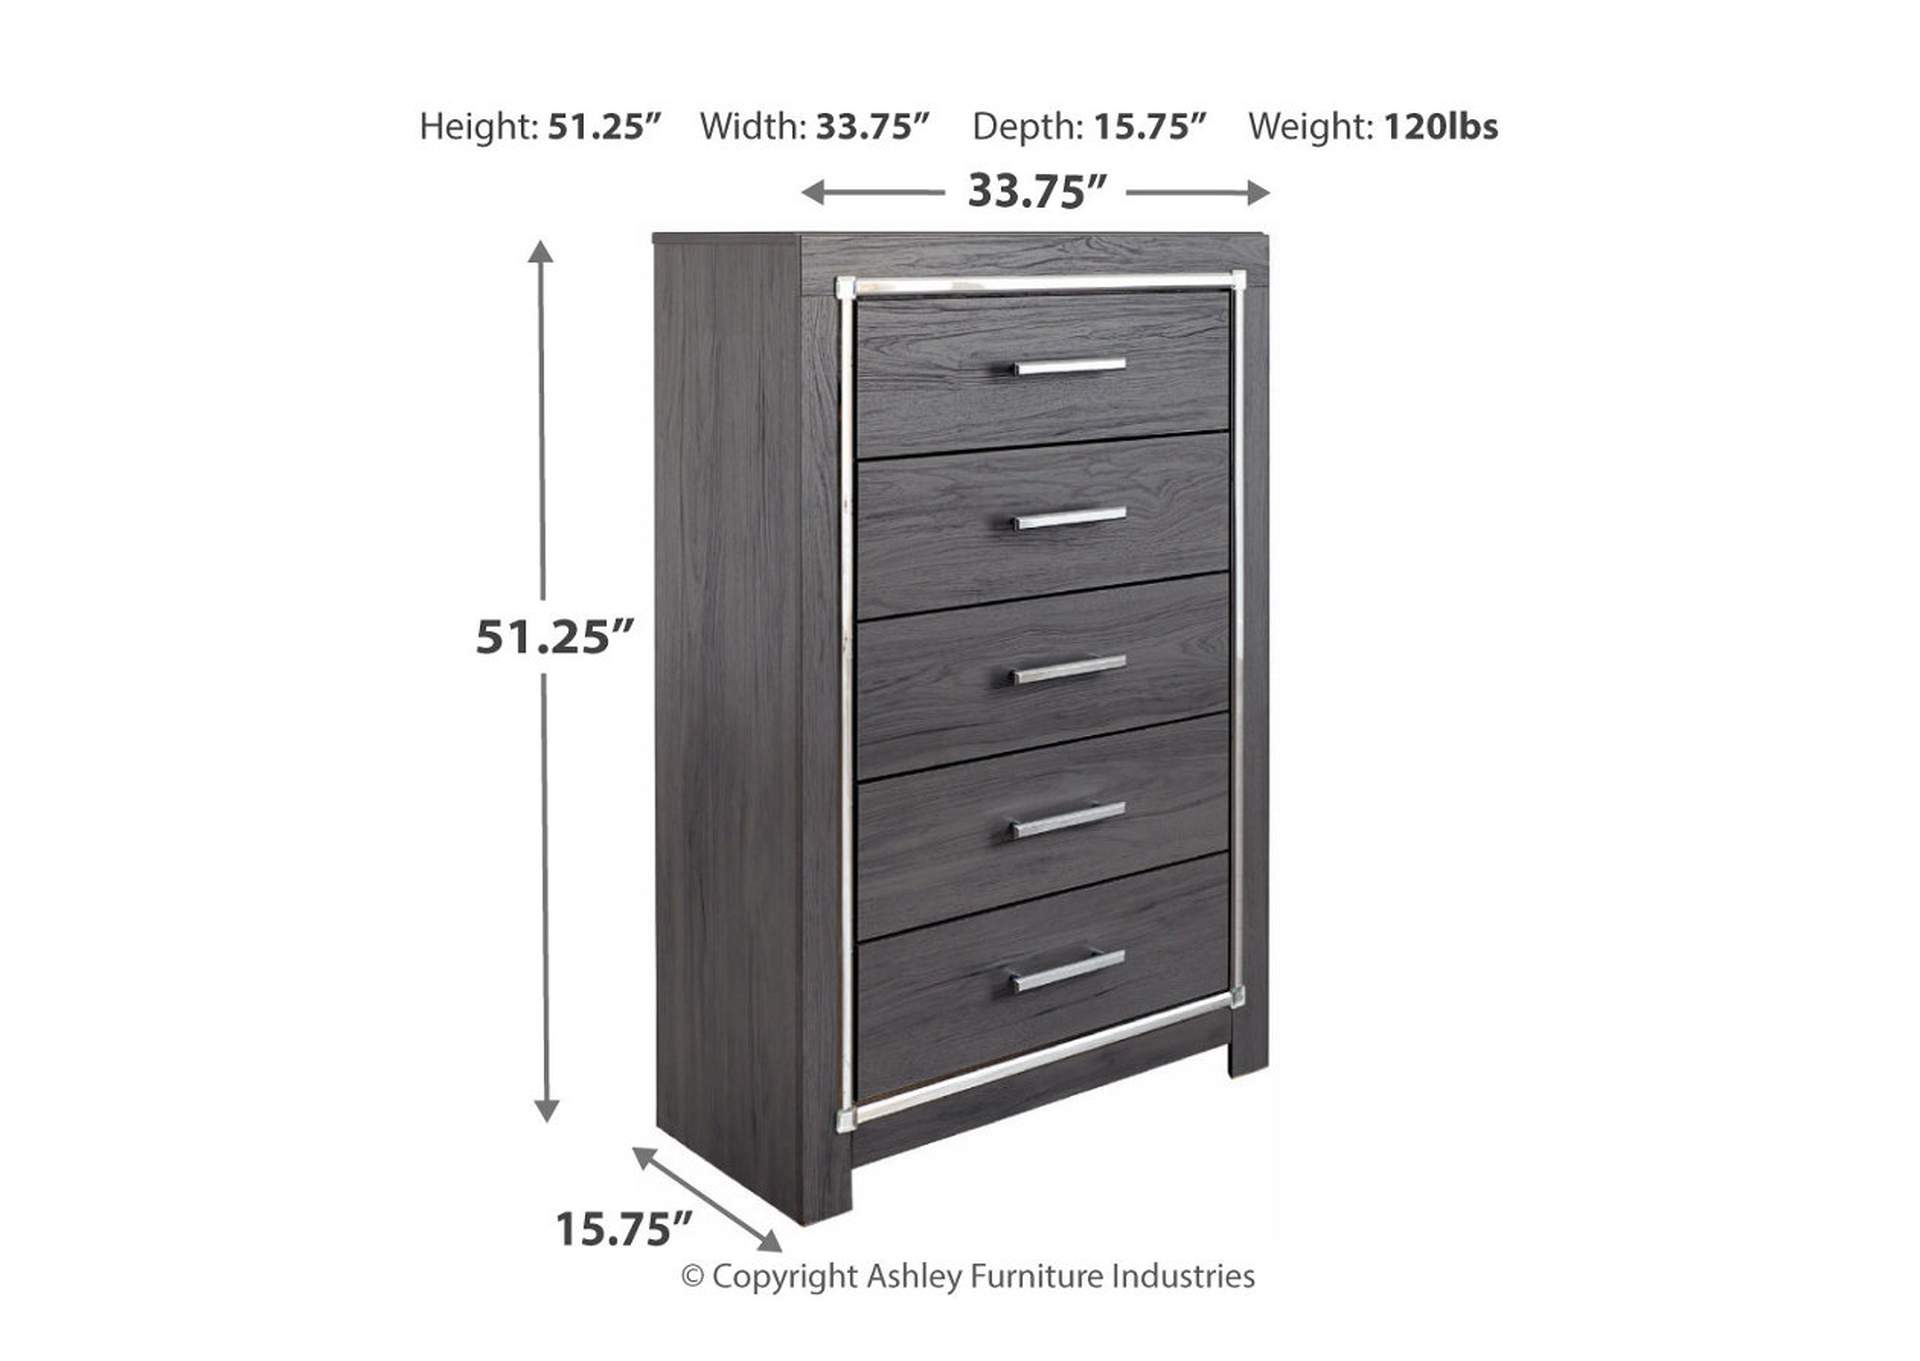 Lodanna Chest of Drawers,Signature Design By Ashley